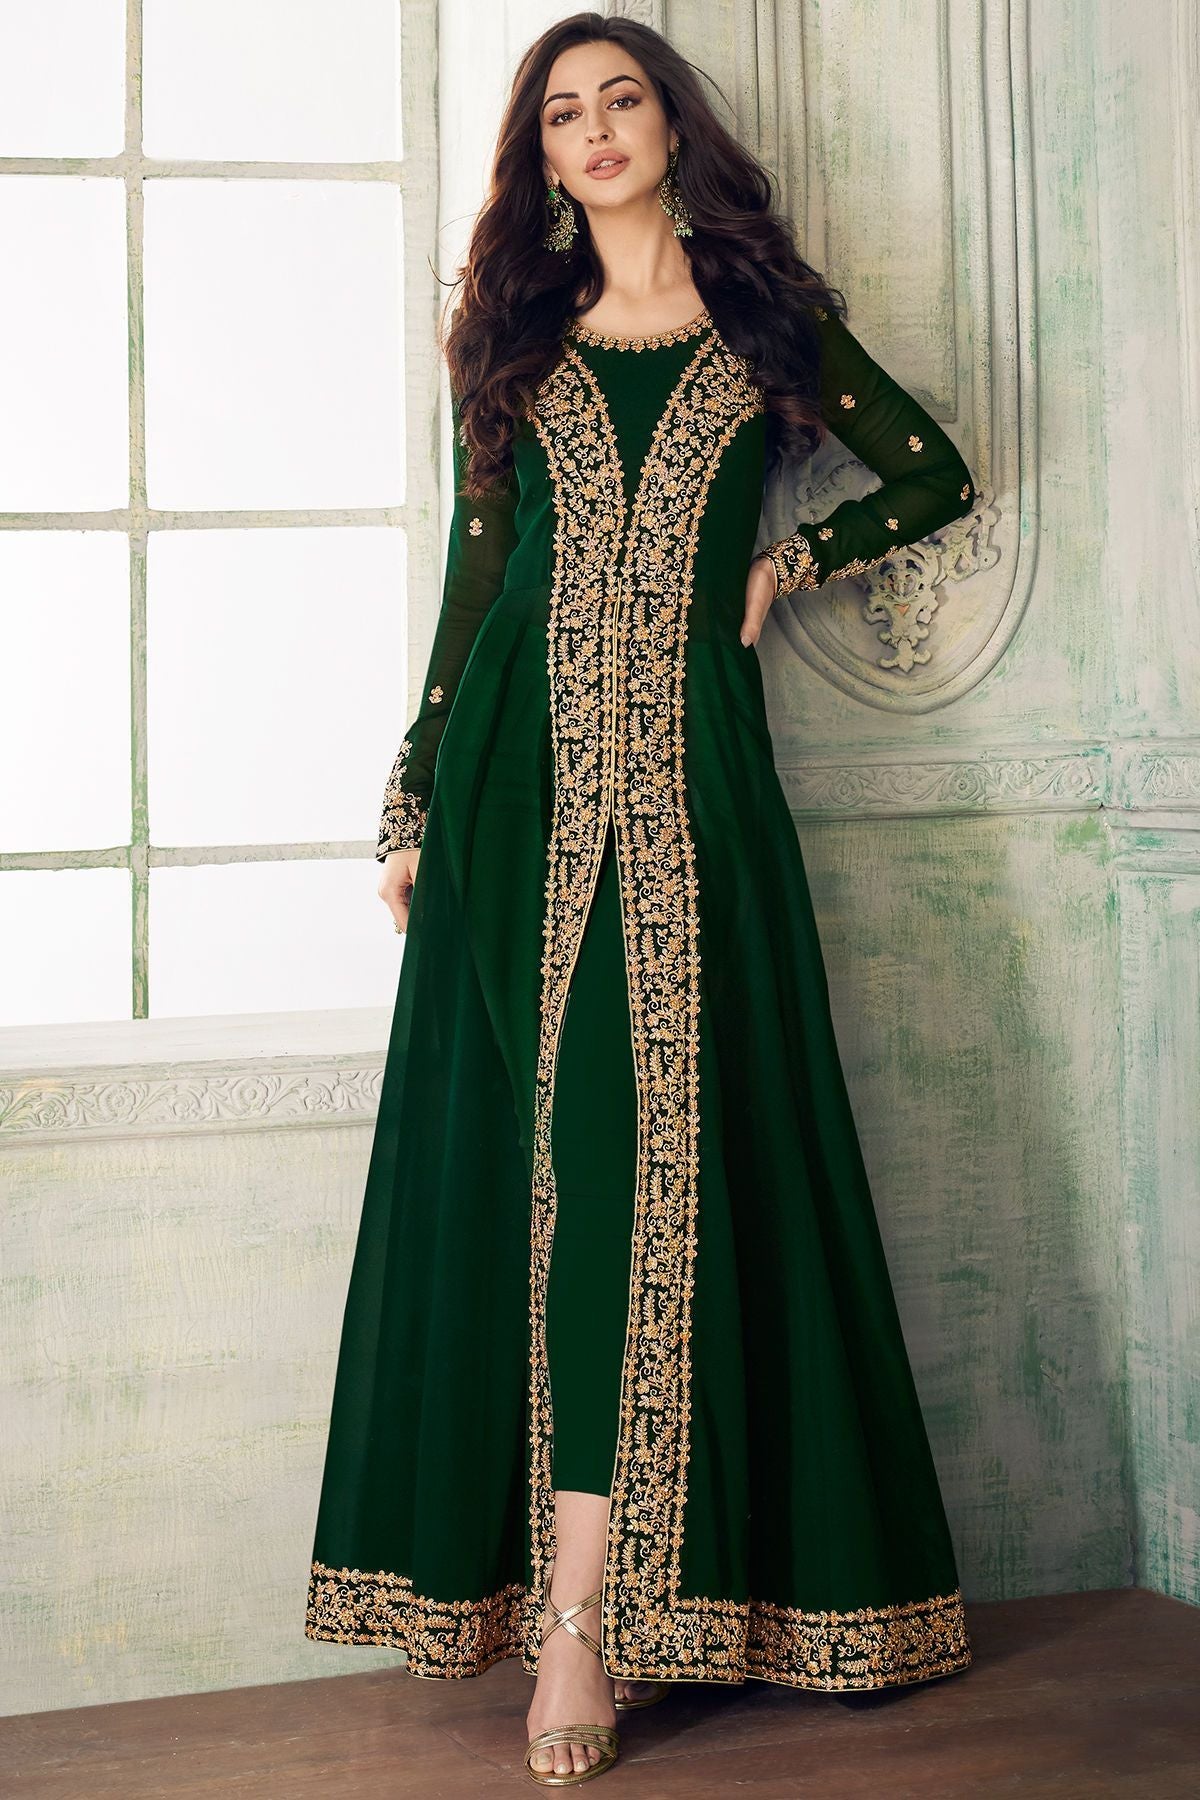 green frock suit